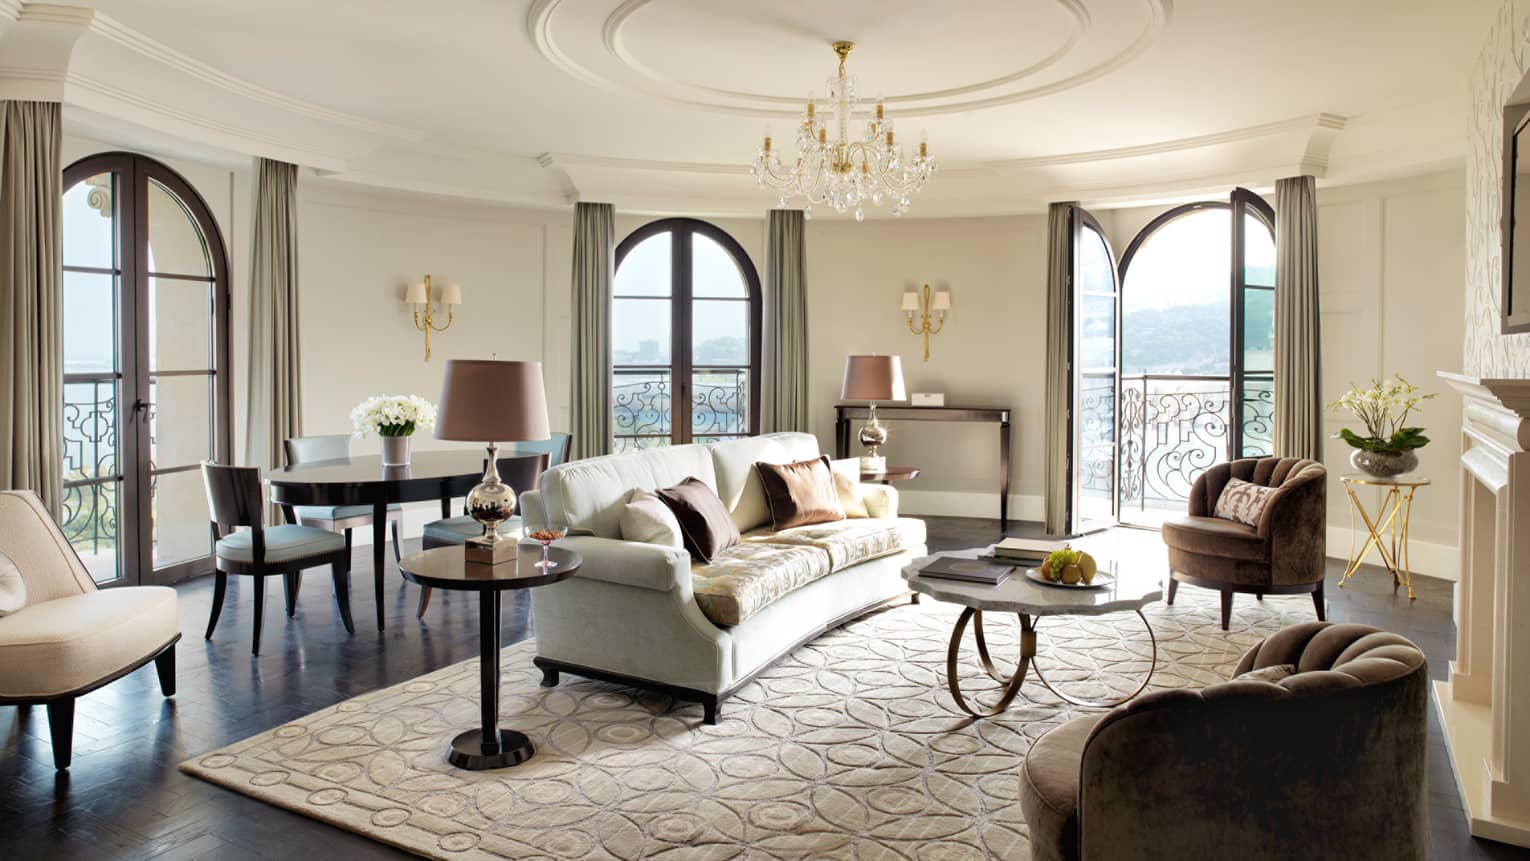 Two-Bedroom Suite circular living room in corner turret, French balcony doors, white sofa and area rug